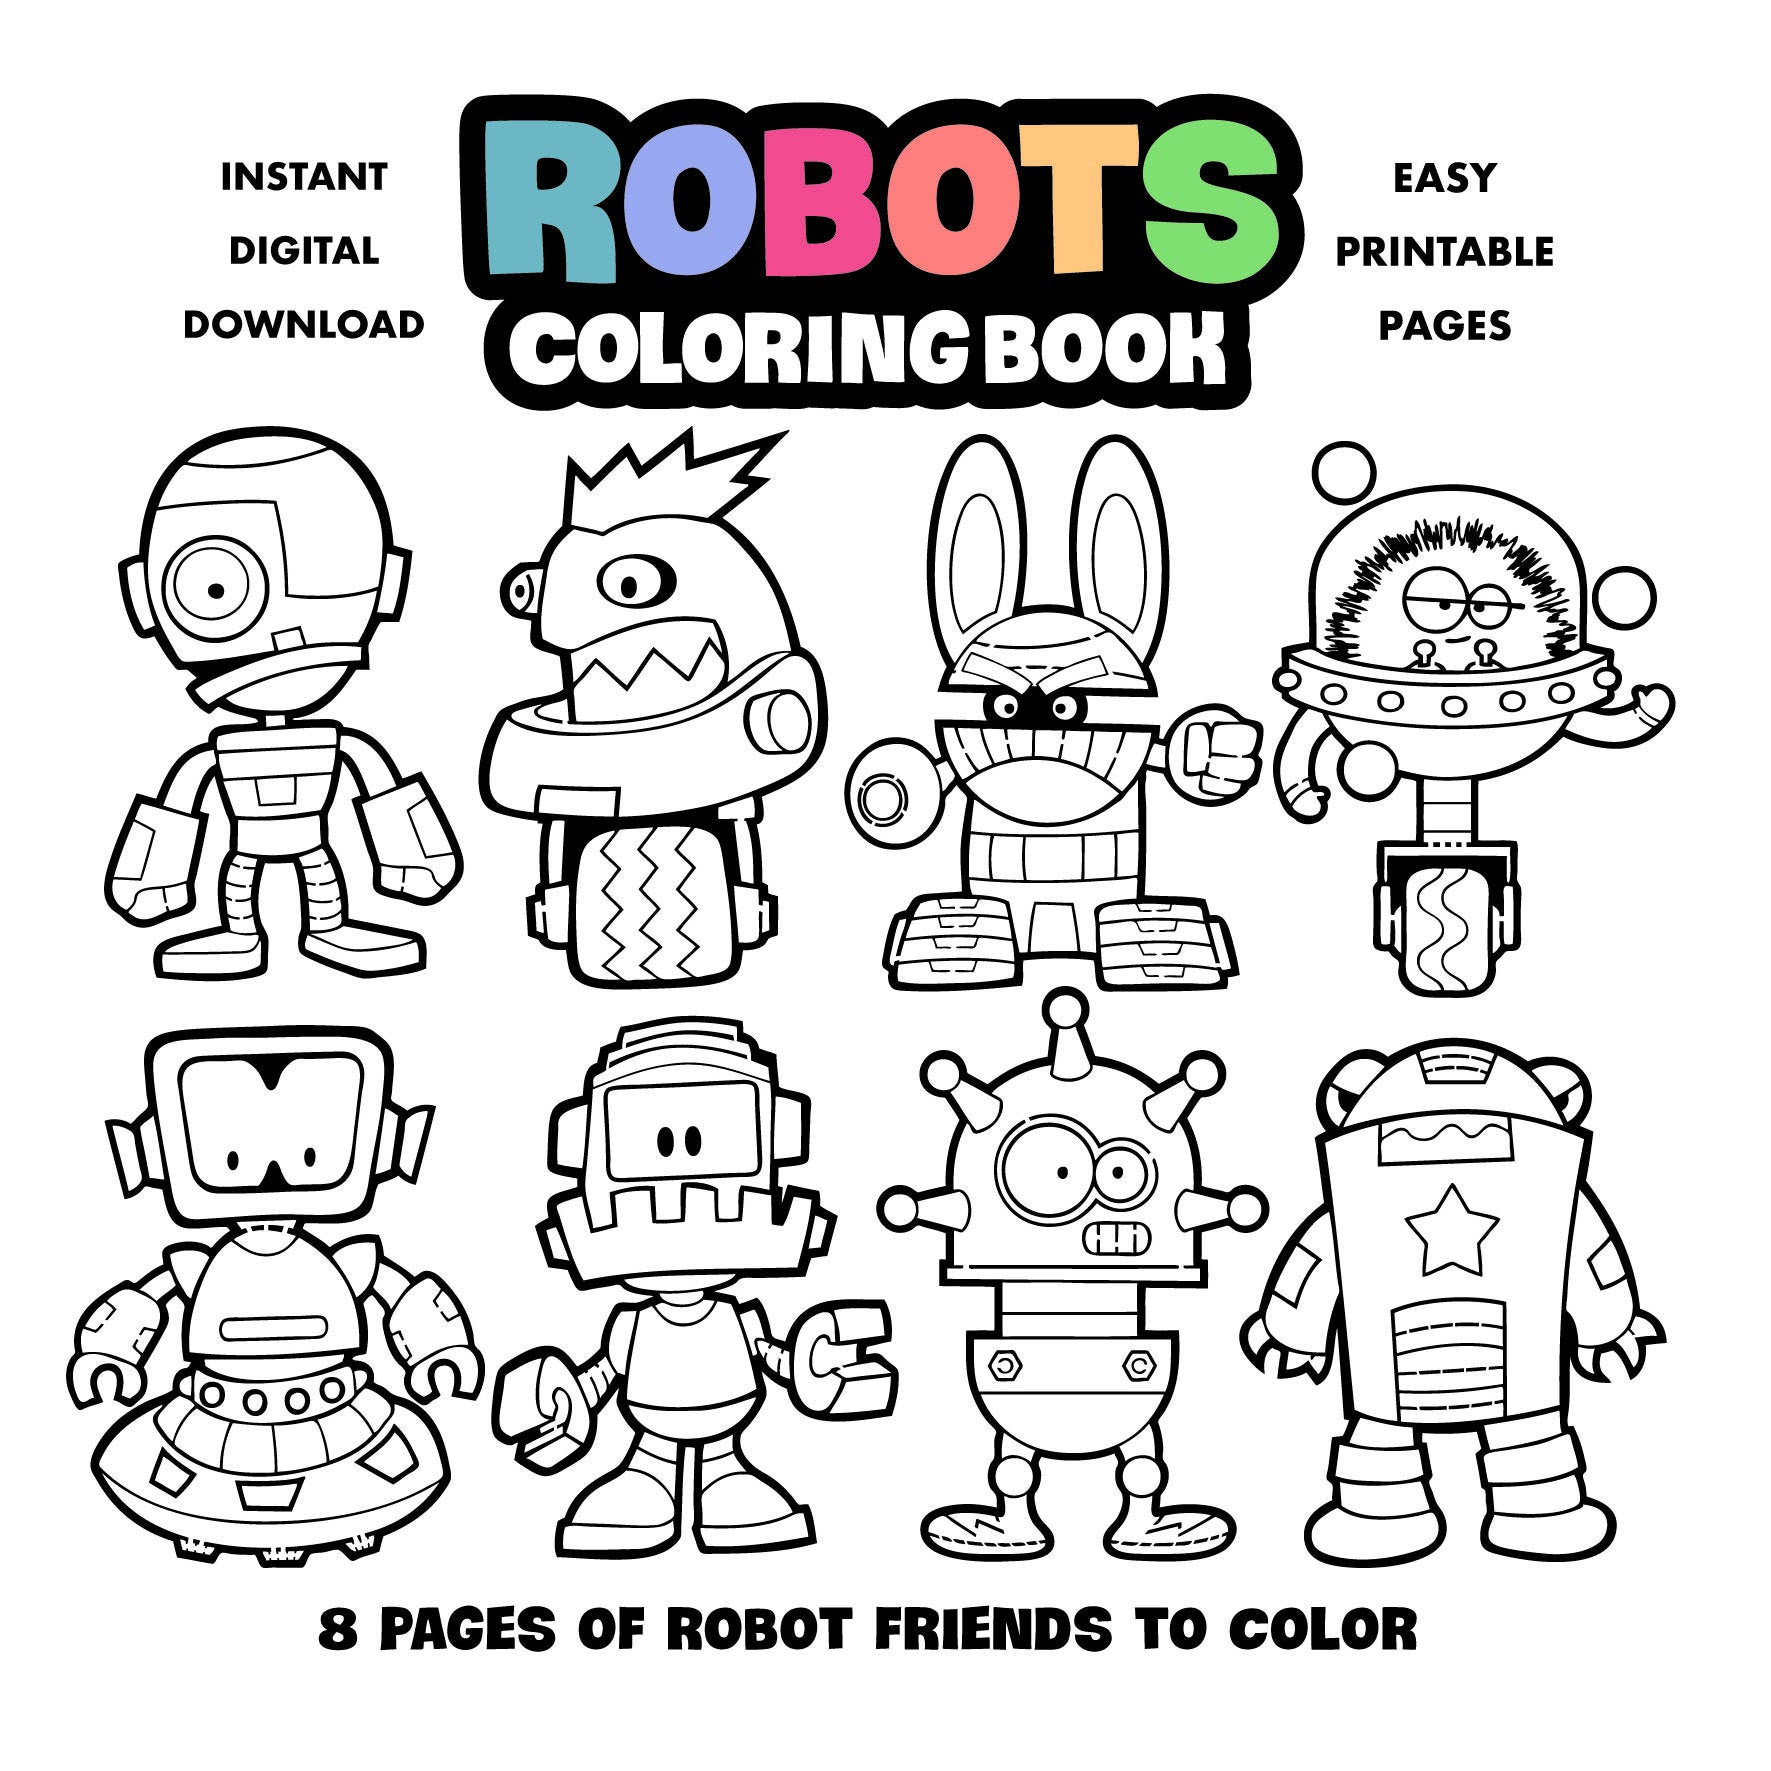 Robots coloring book for kids printable coloring pages for children boys and girls digital download arts and crafts halloween activity instant download